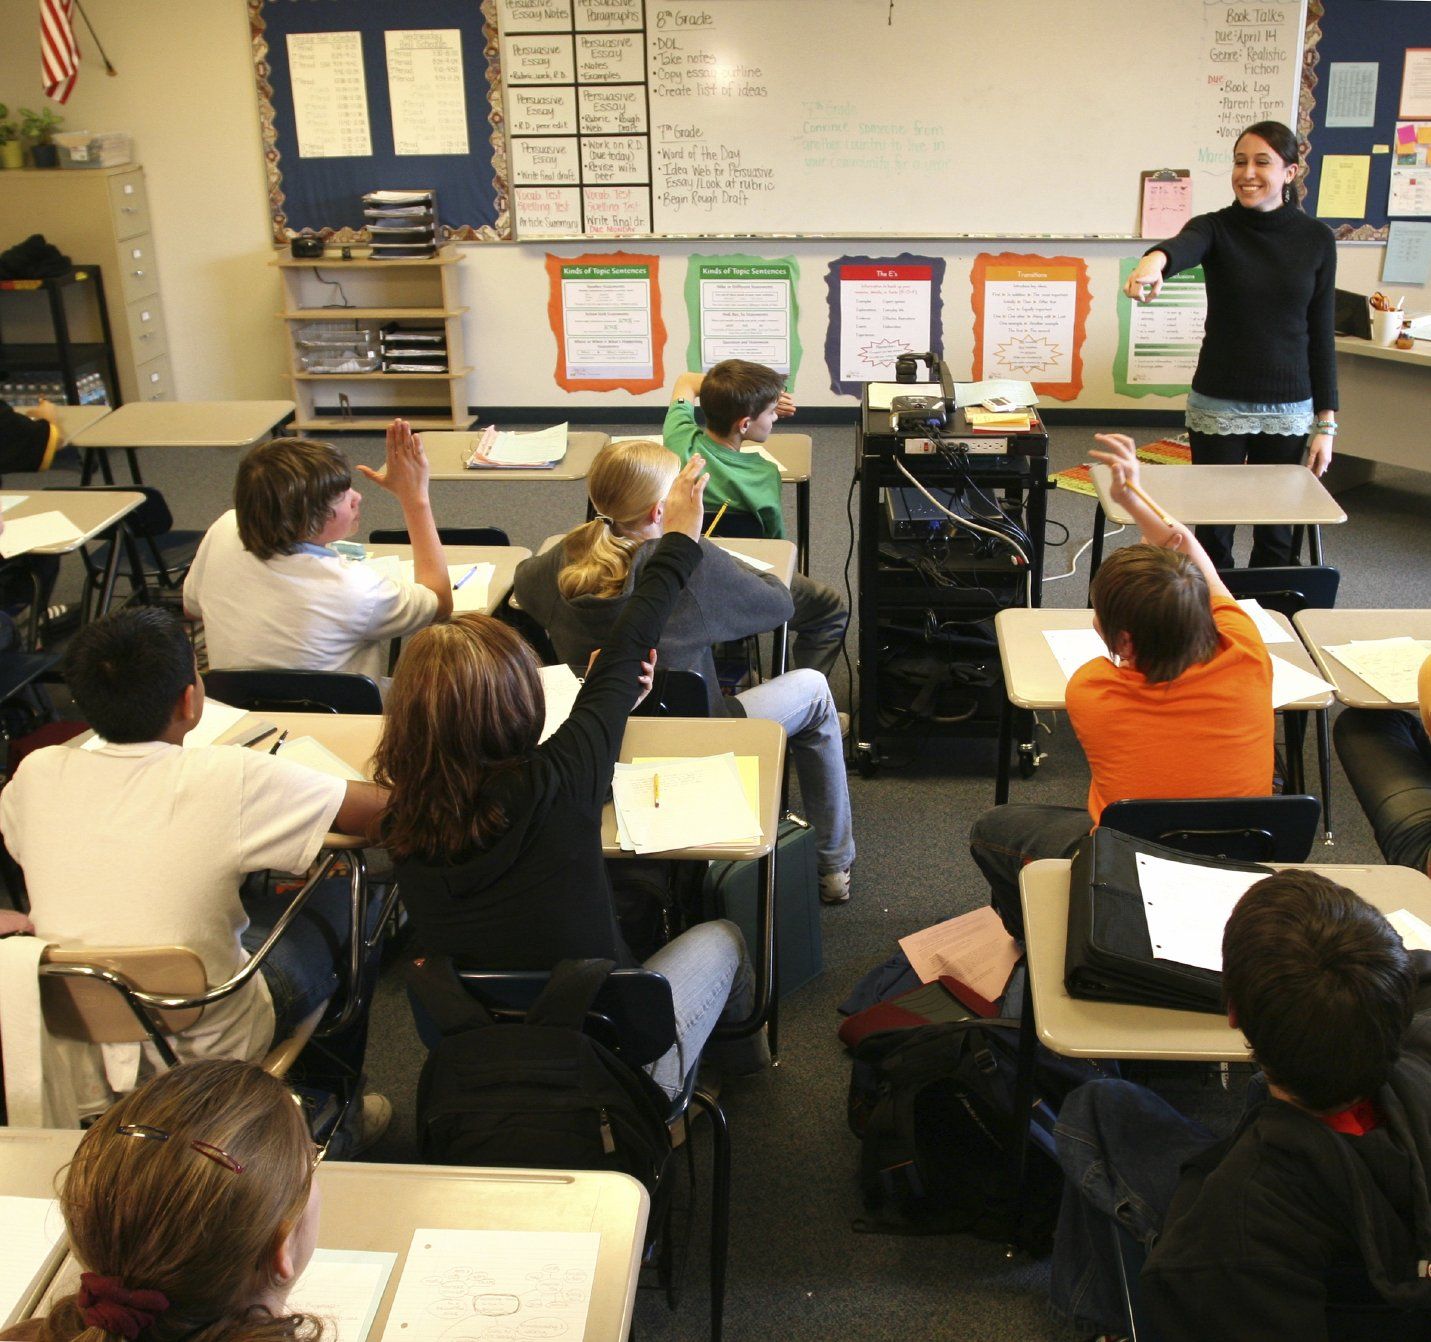 Students in a classroom with their hands raised answering the teacher's questions